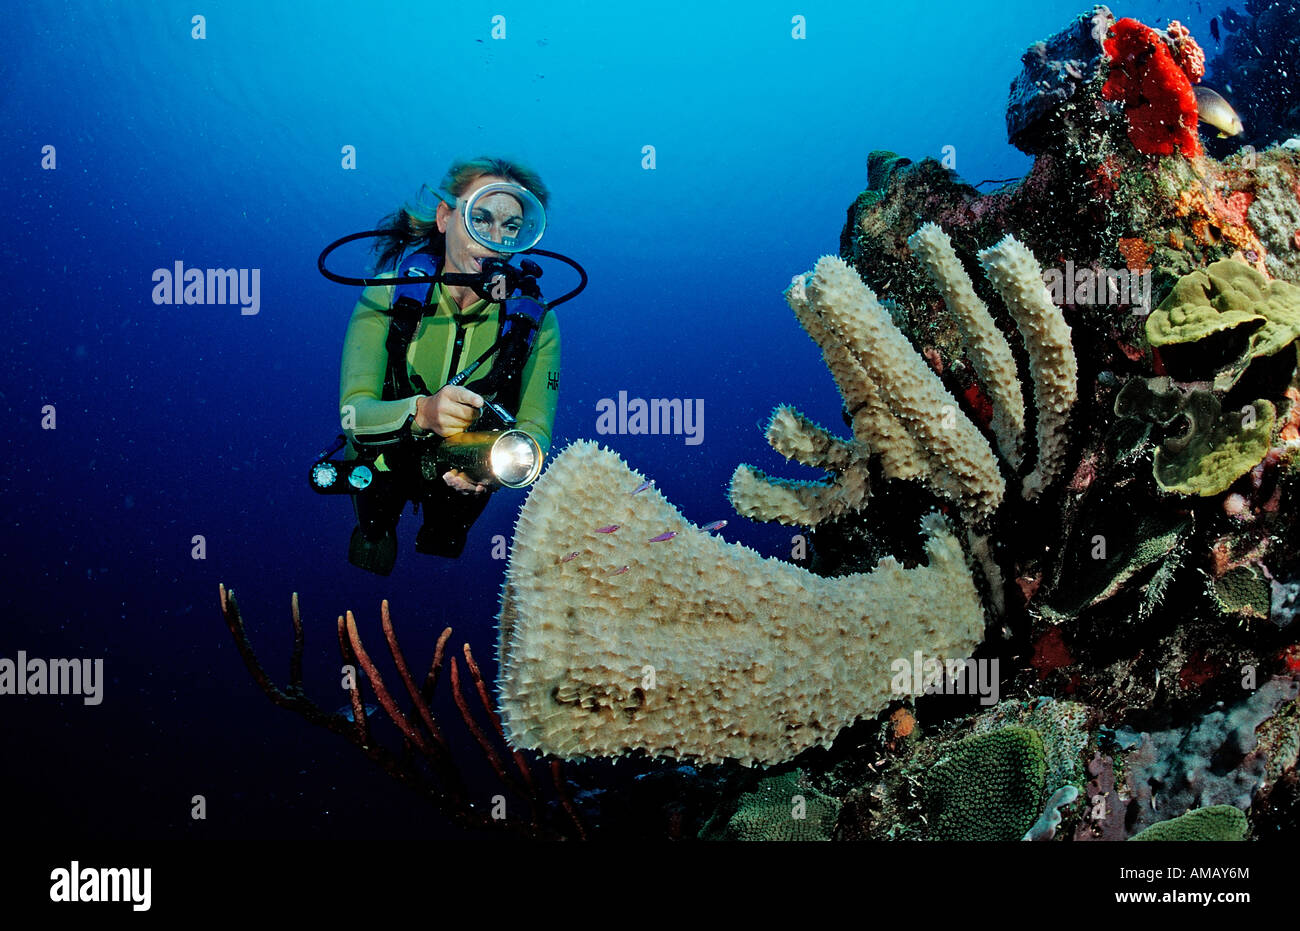 Scuba diver and coral reef Saint Lucia French West Indies Caribbean Sea Stock Photo